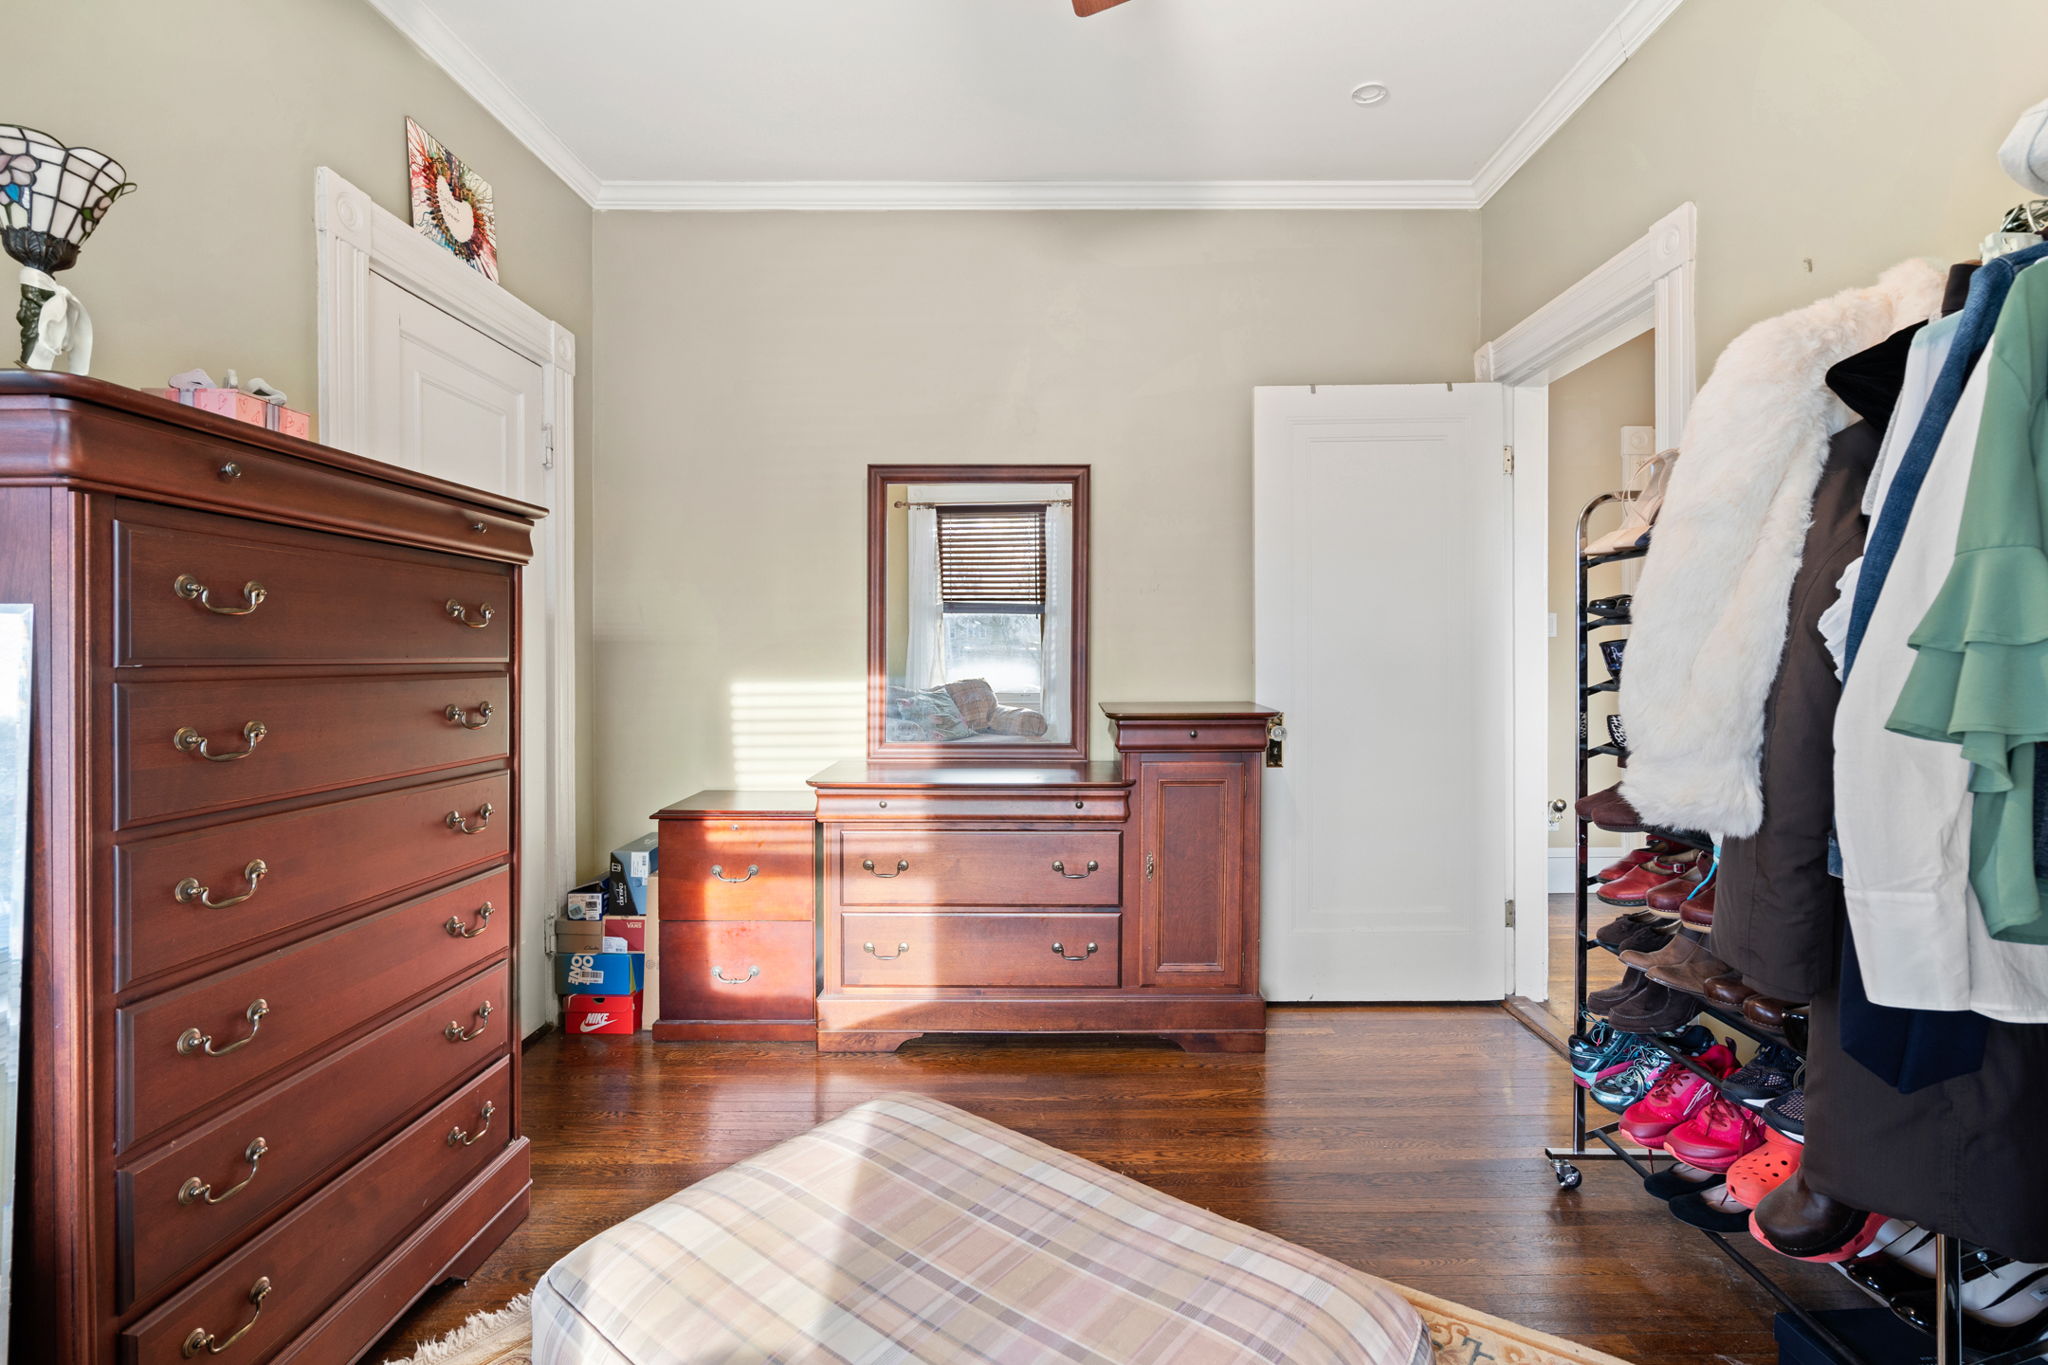 A bedroom with hardwood flooring, beige walls, white crown molding, handing clothes, shoes on a rack, wood furniture, and a beige-colored plaid rug.